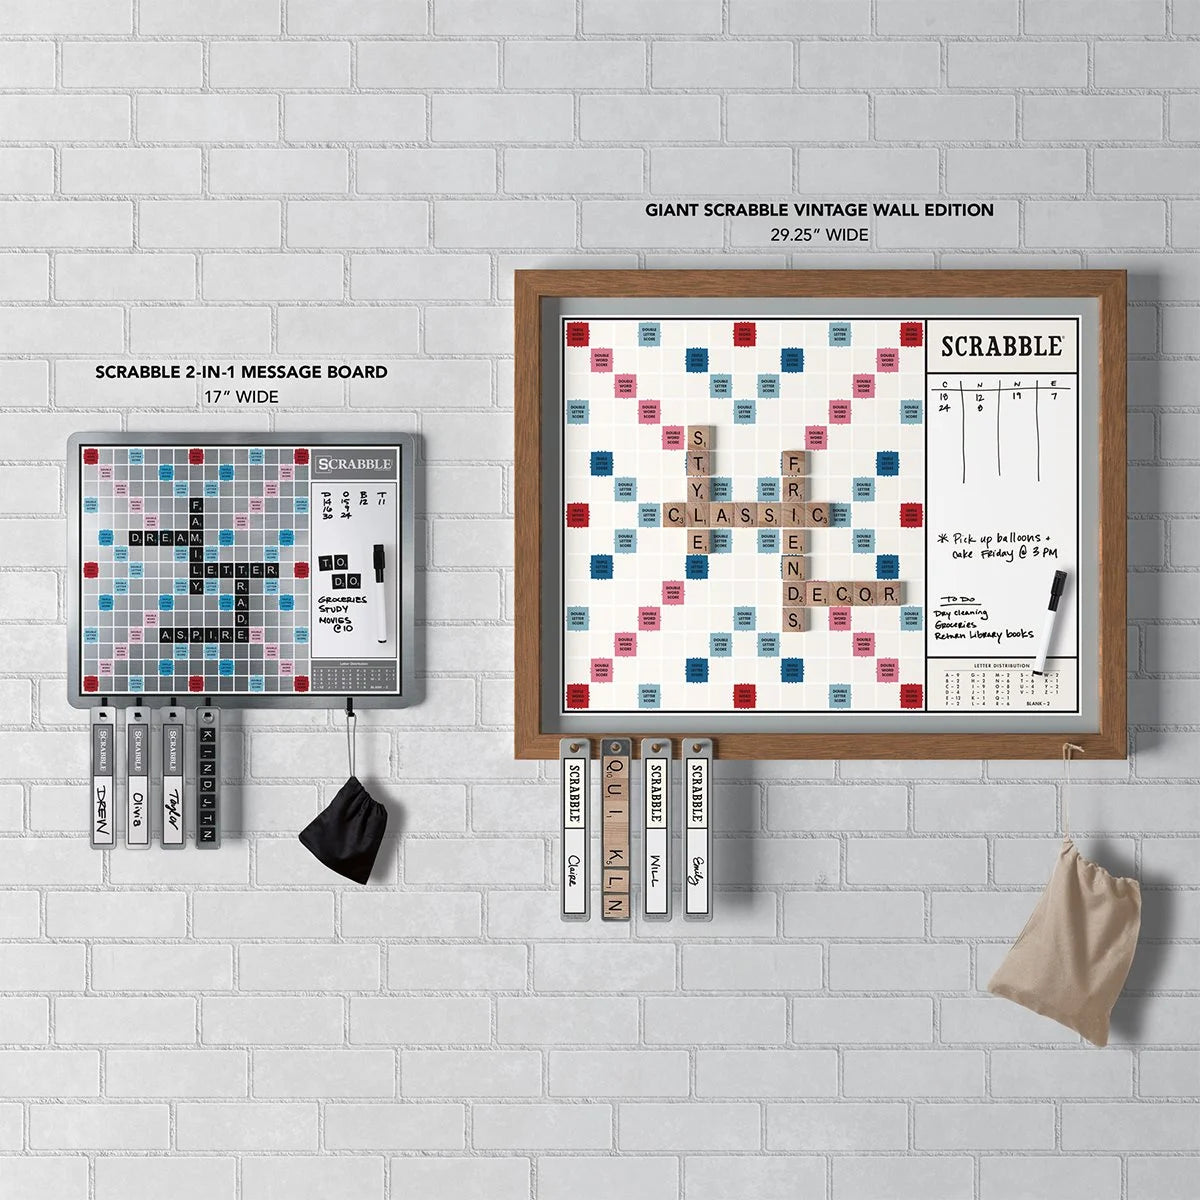 Winning Solutions Scrabble Deluxe Vintage 2-in-1 Wall Edition with Dry Erase Message Board